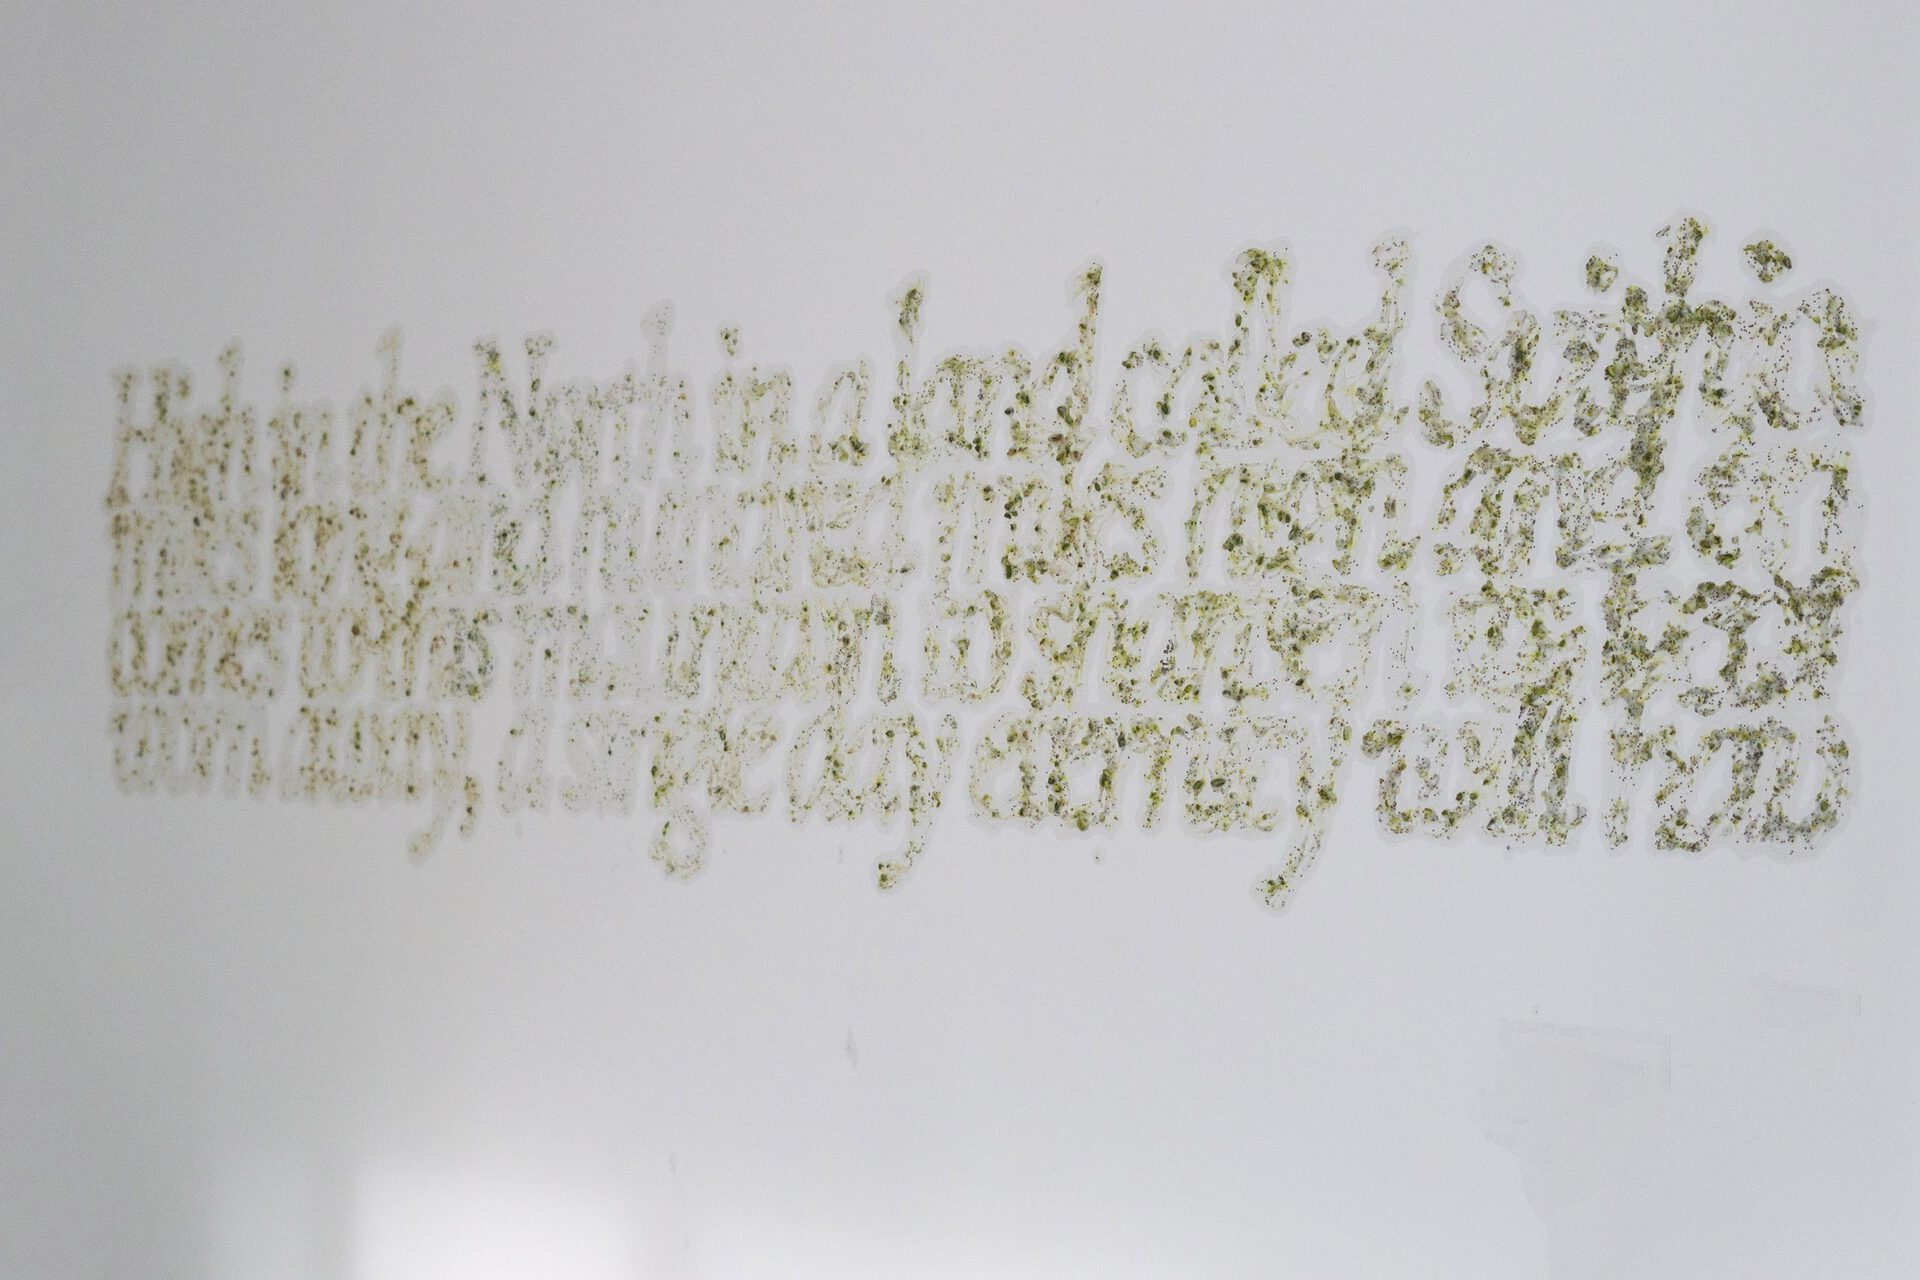 Kay Yoon, Words melt when they are spoken, 2022, Coconut Oil, Pistachio, Chia Seeds, and Pumpkin Seeds, Variable Dimension